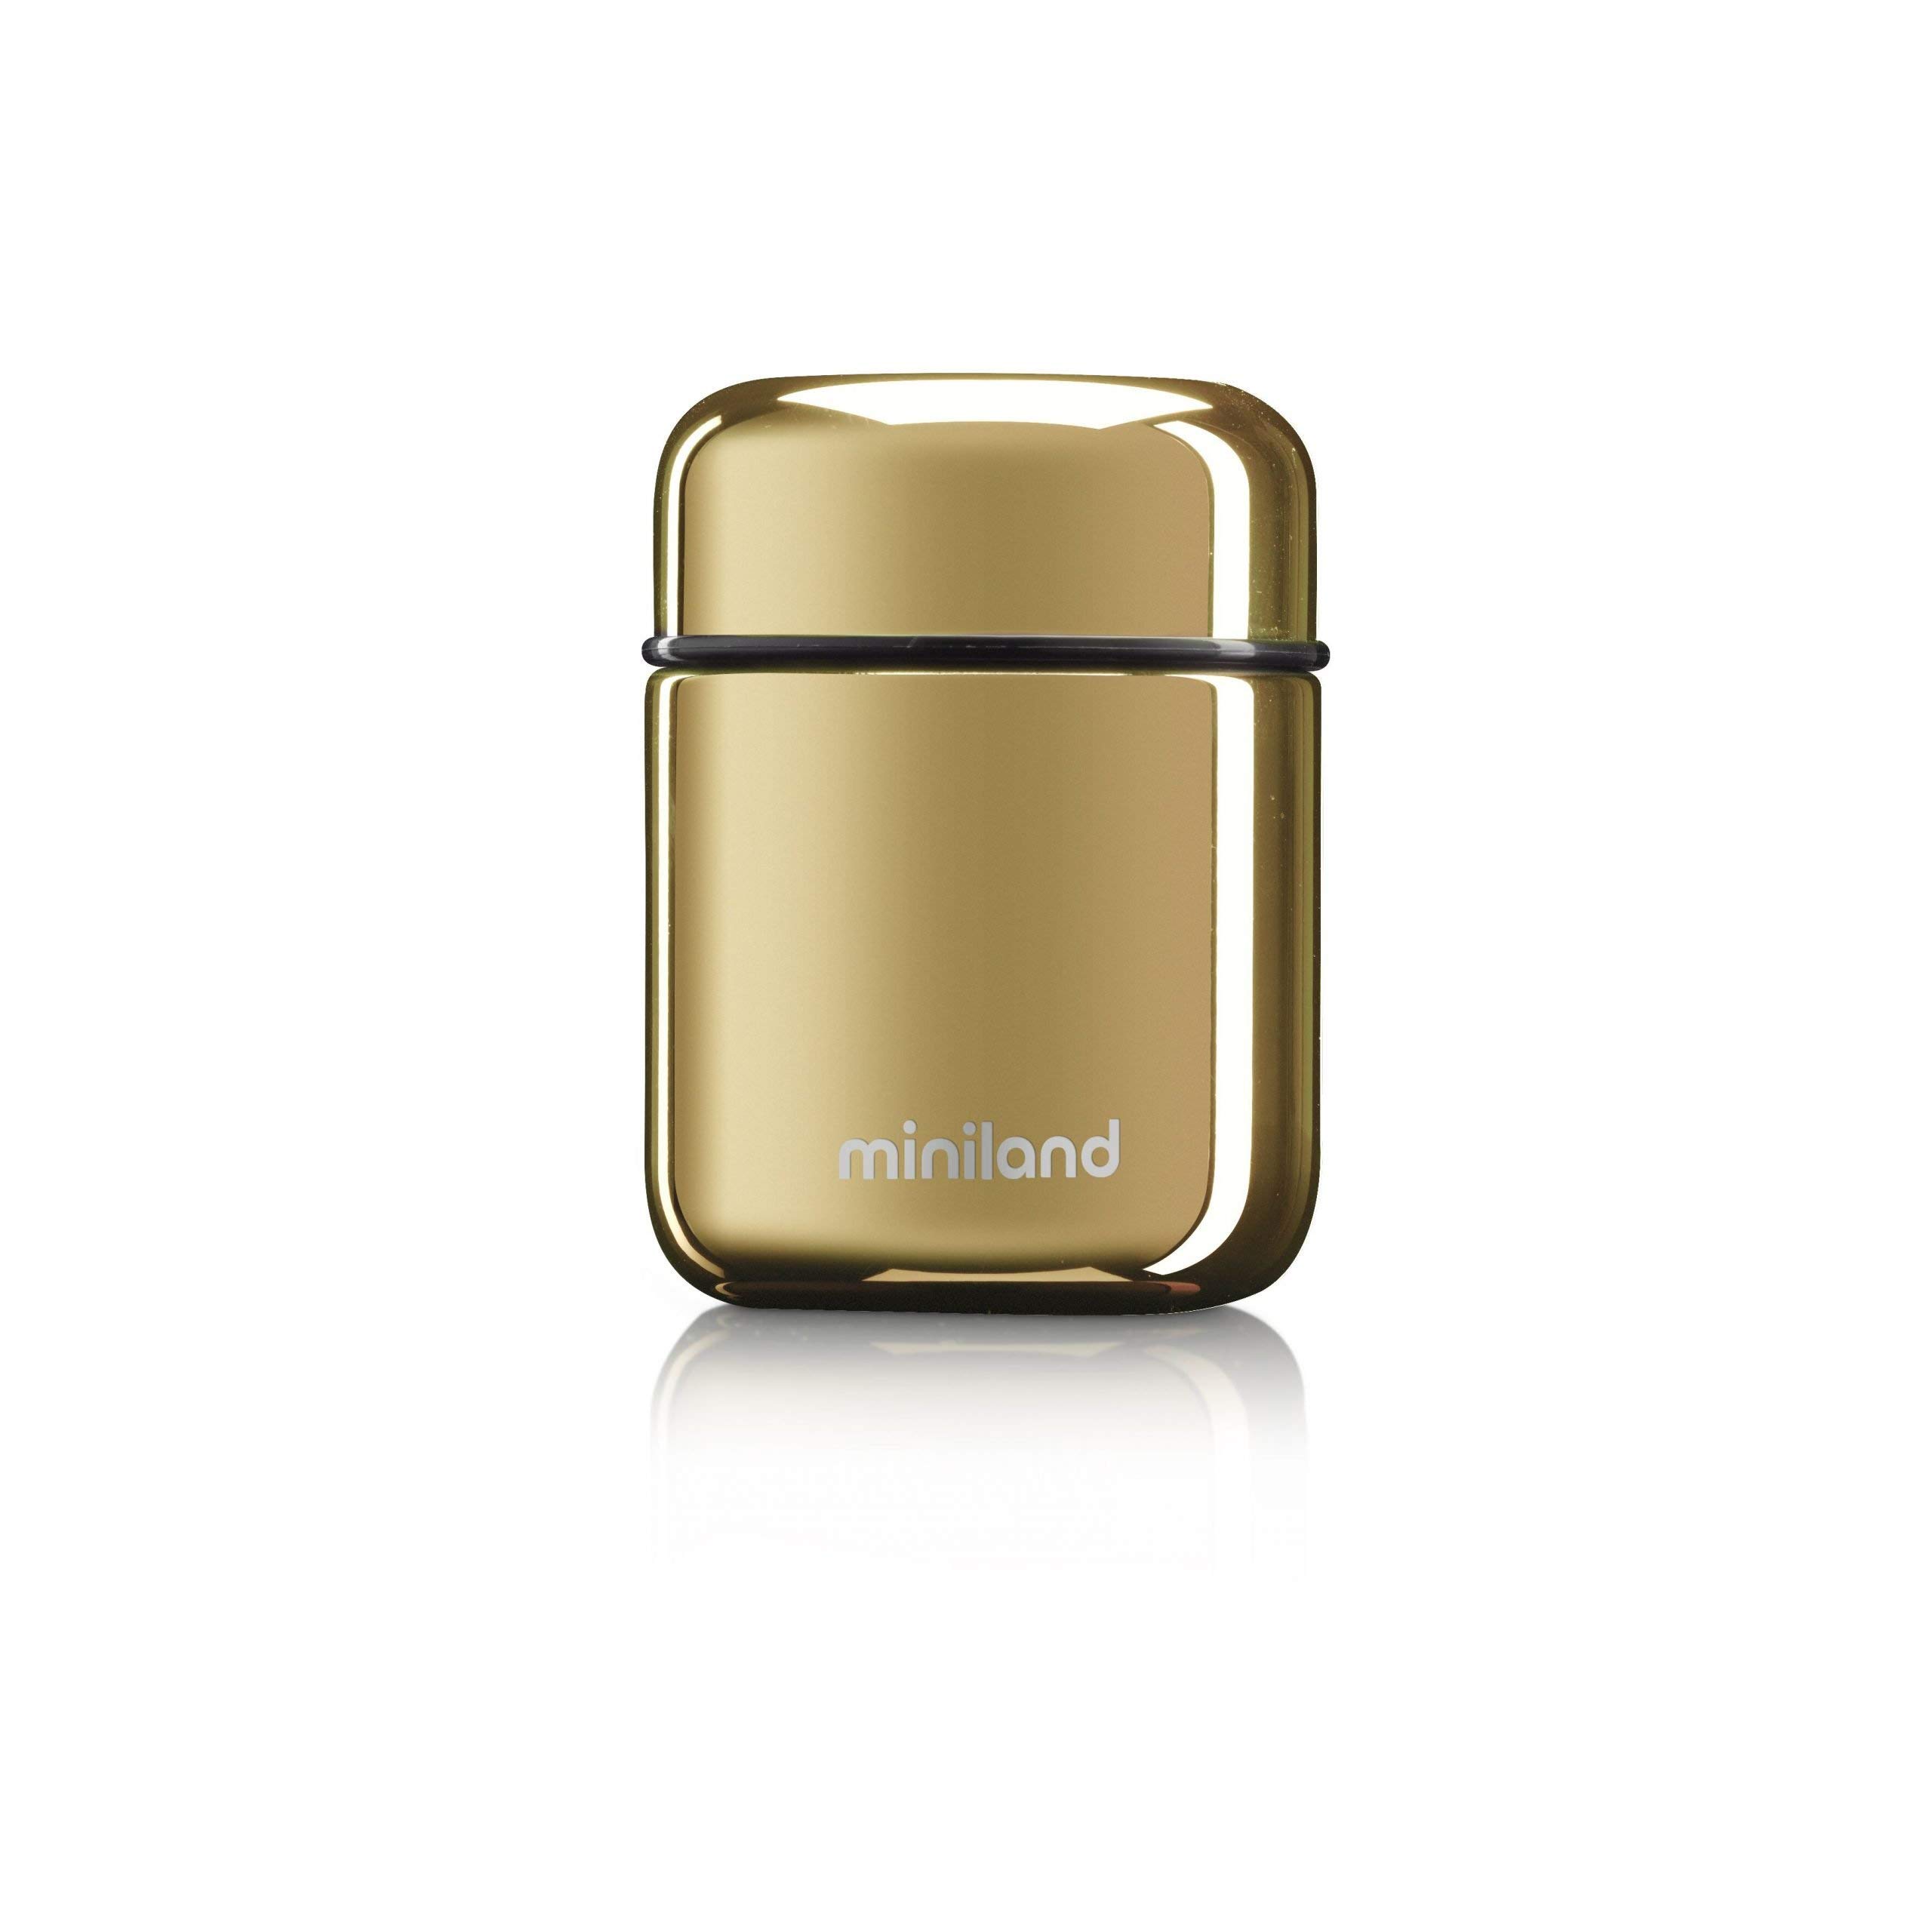 Miniland FOOD THERMOS MIN, DELUXE GOLD, Isolierbehälter für Babynahrung, 280 ml, 1 Dose